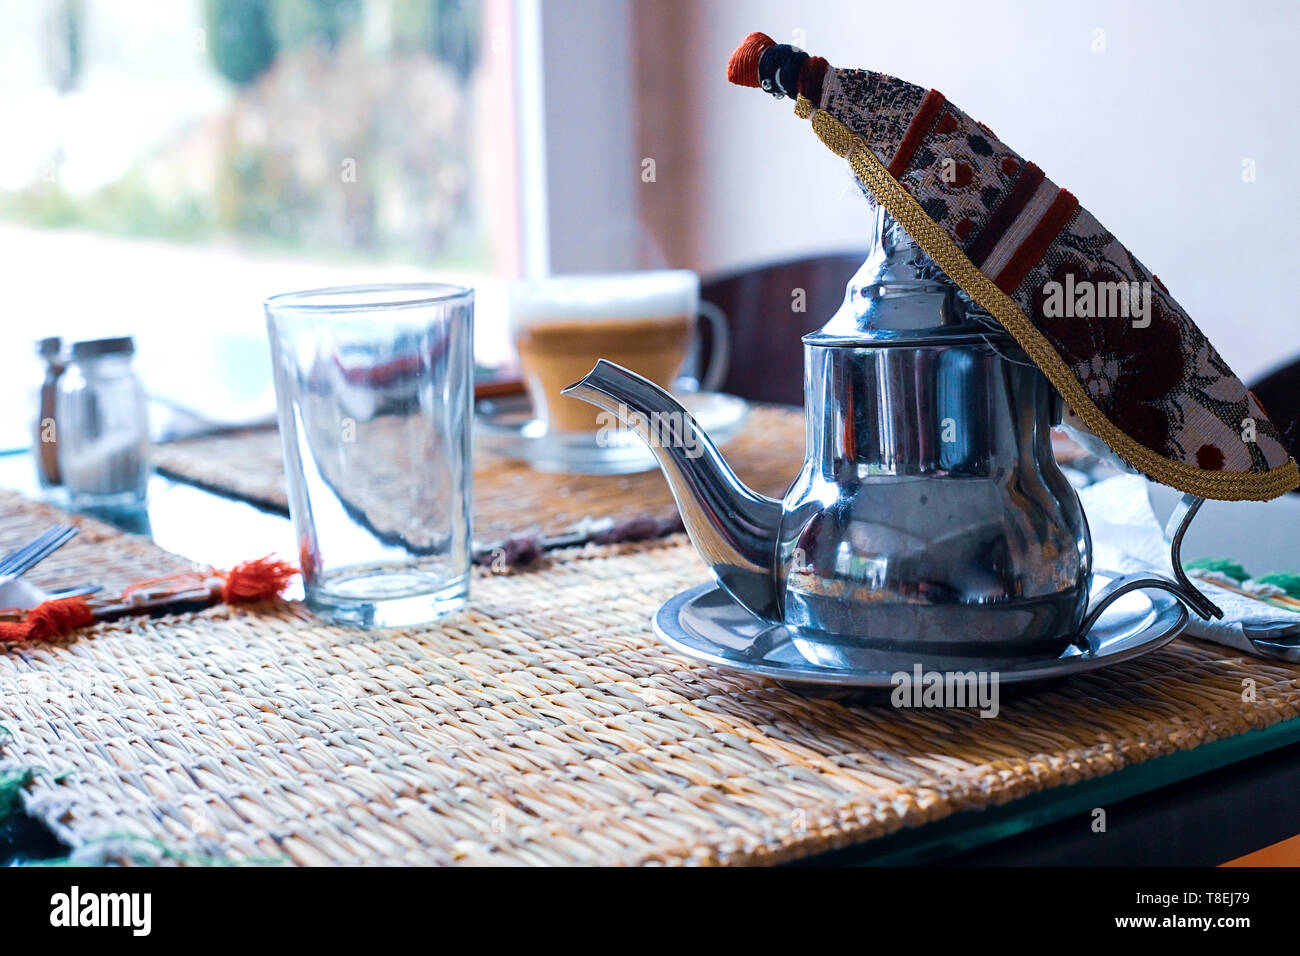 https://c8.alamy.com/comp/T8EJ79/moroccan-tea-with-mint-and-sugar-in-a-glasses-on-a-copper-plate-with-kettle-morocco-T8EJ79.jpg